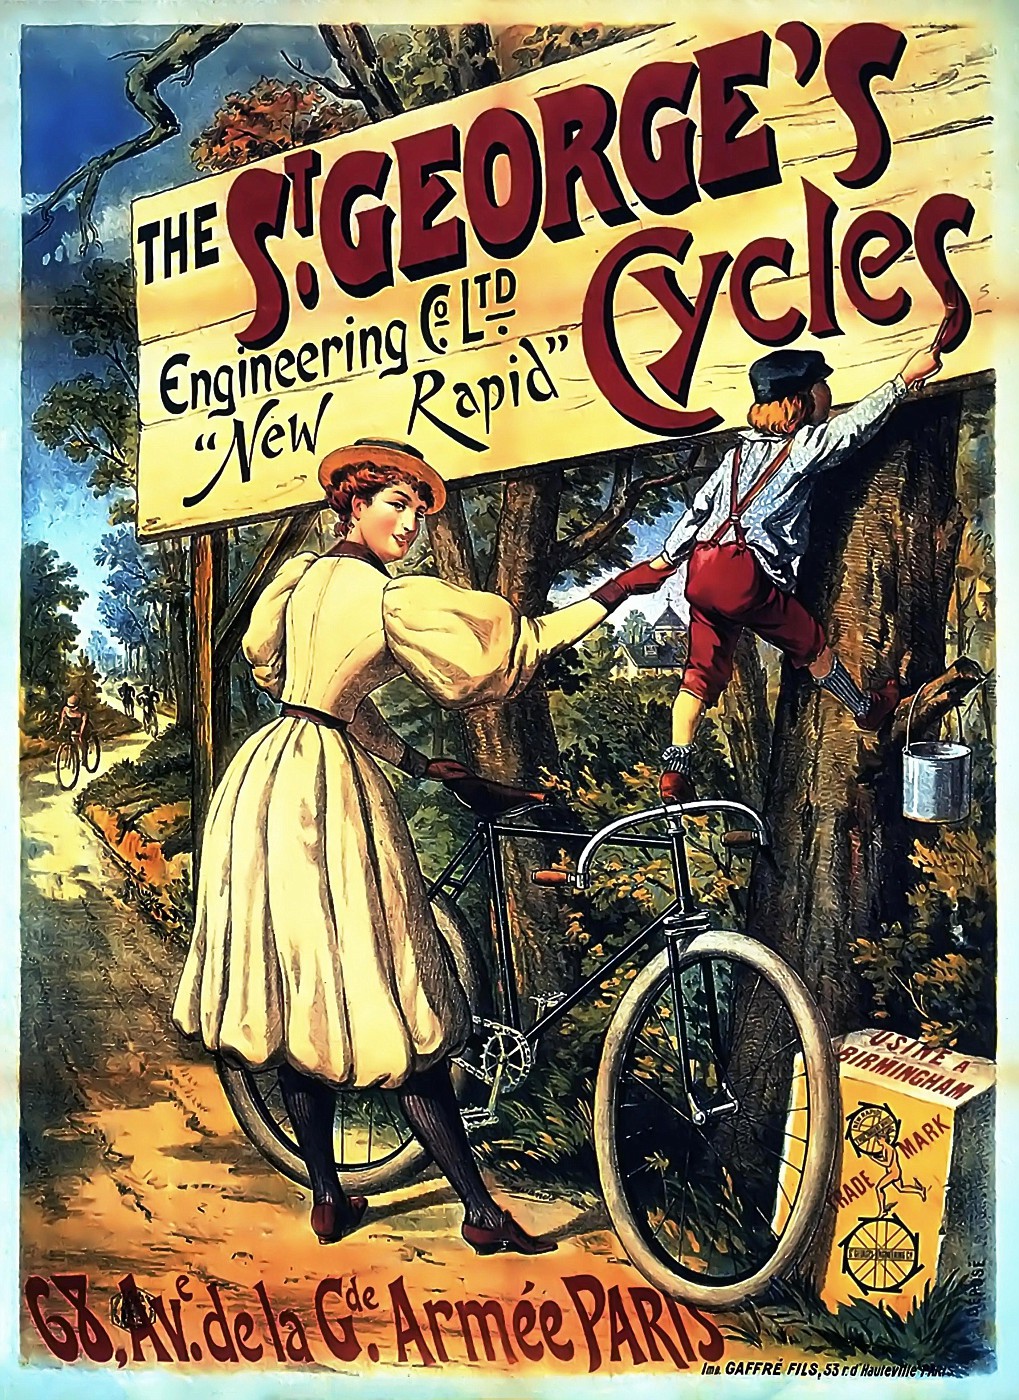 St. George's Cycles